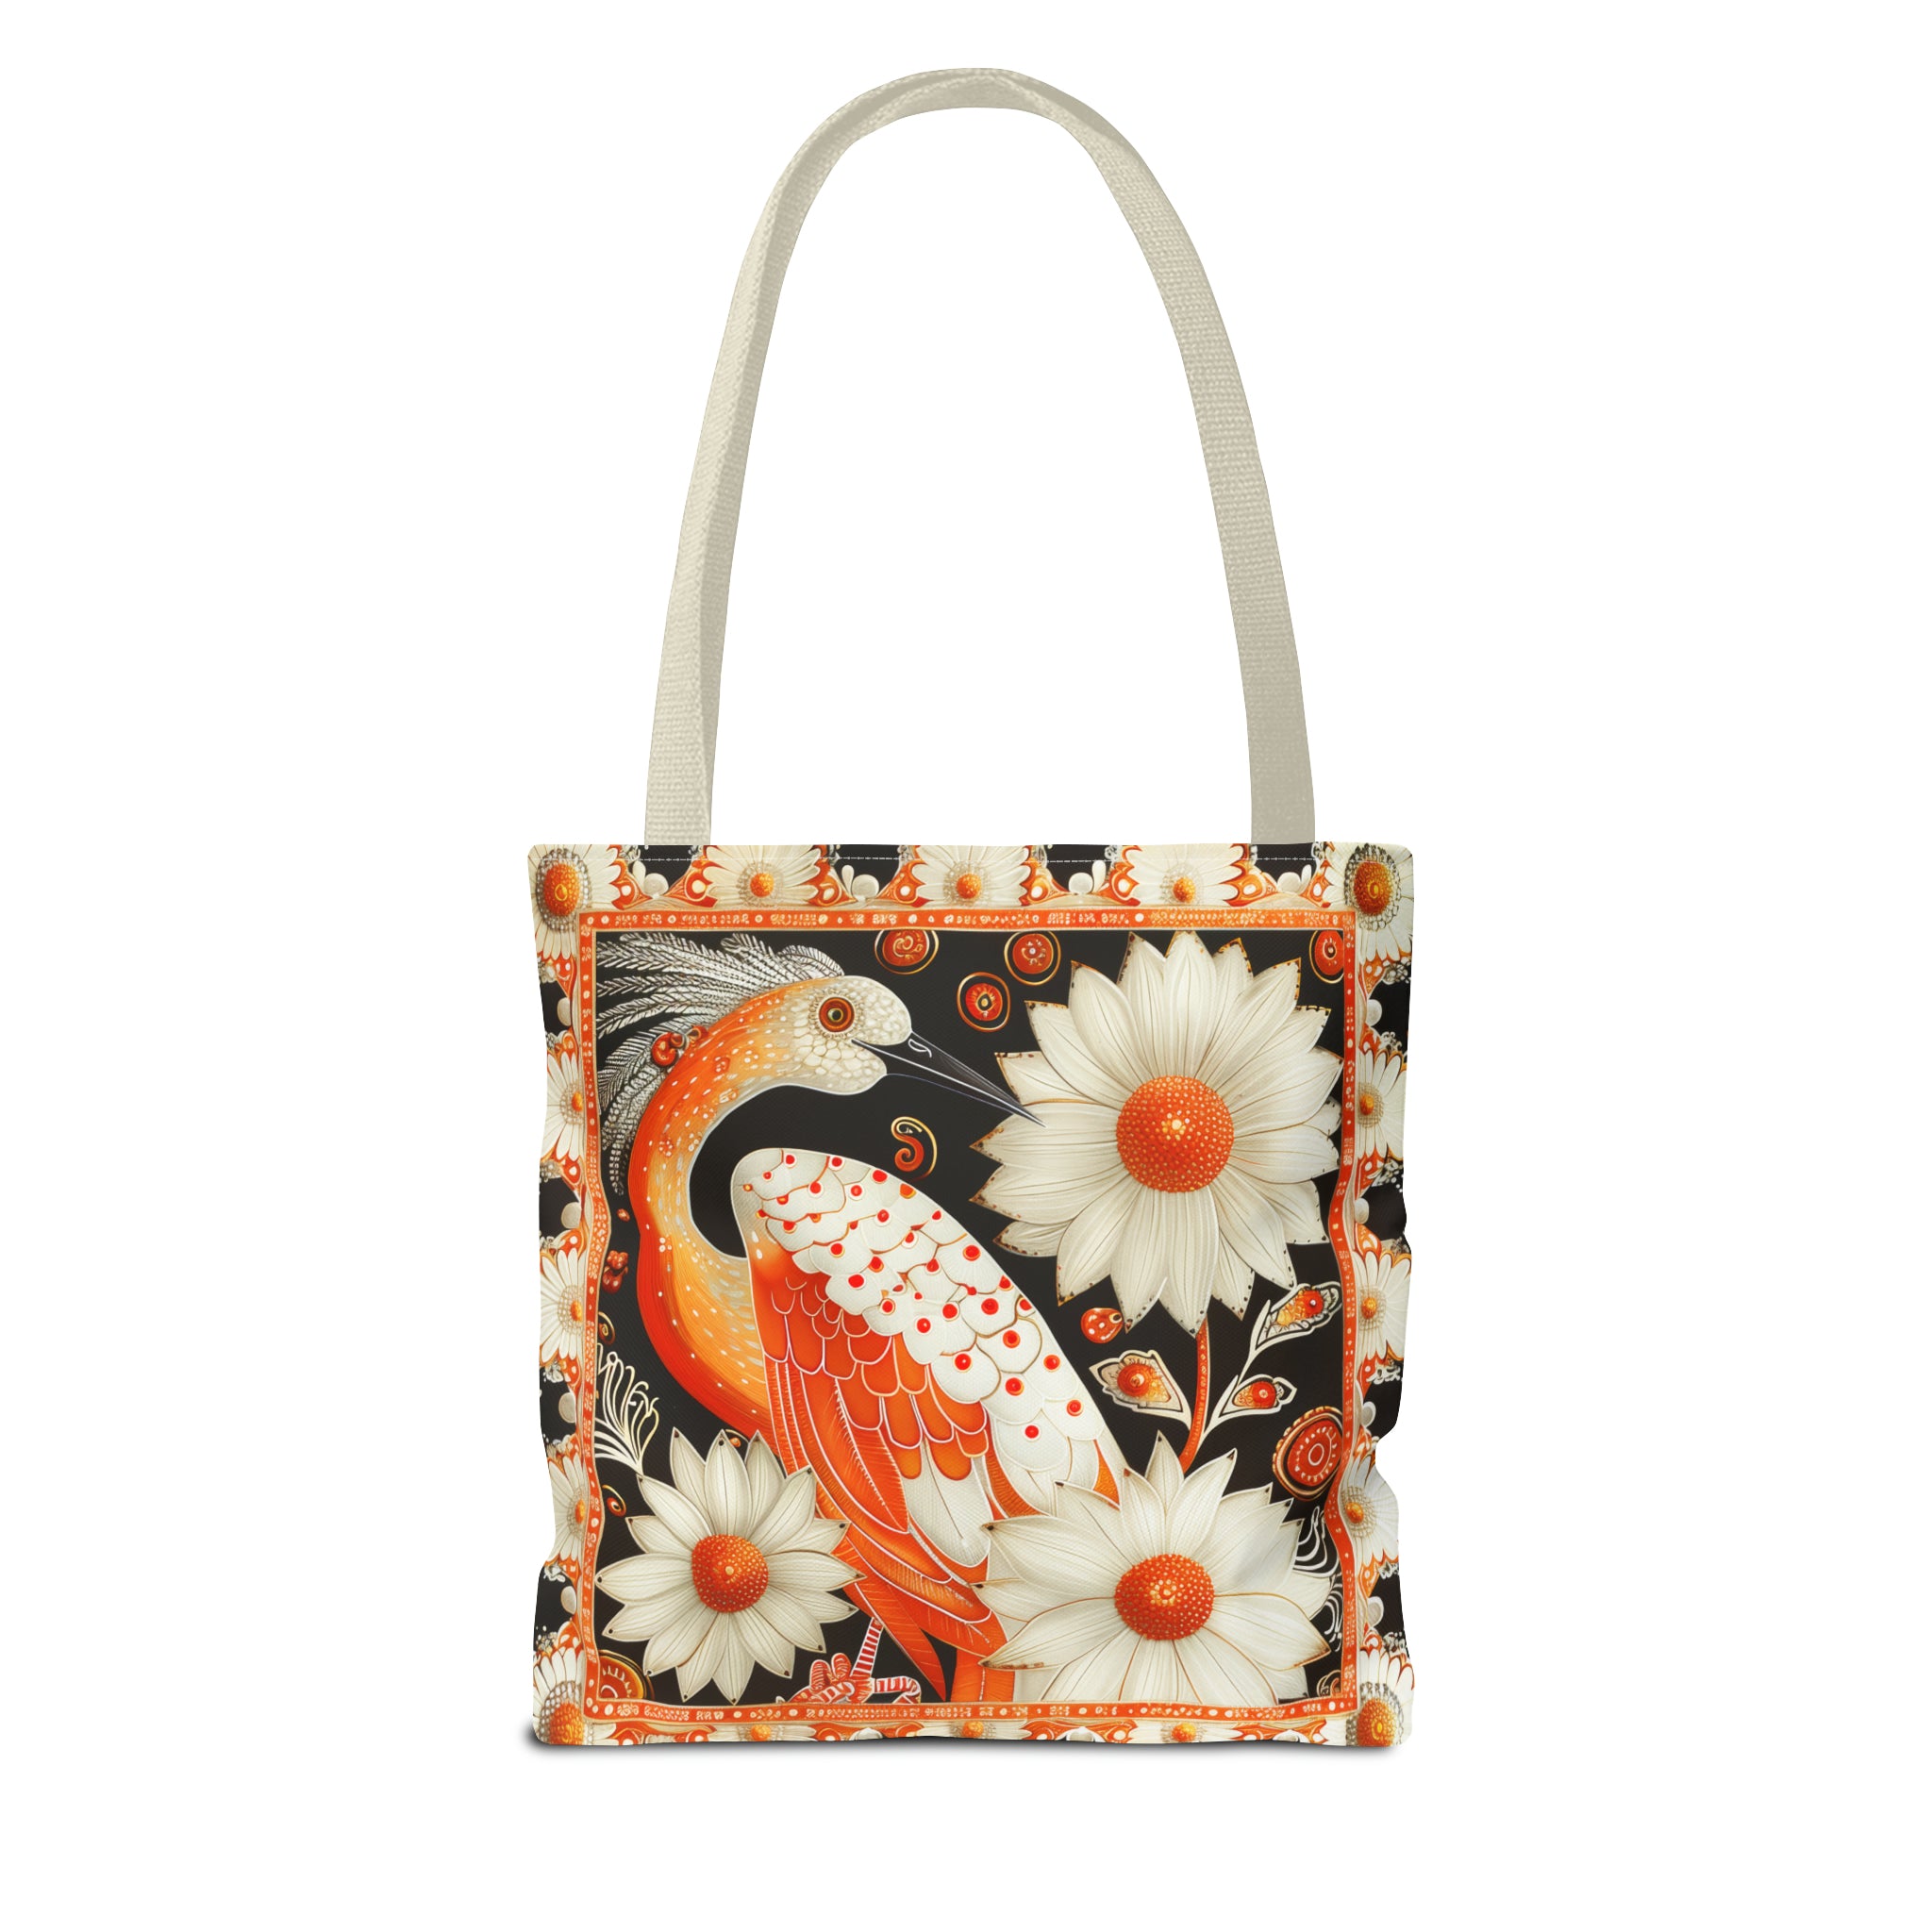 Canvas Tote Bag, inspired vintage orange stork design , vibrant artistic accessory, whimsical all over print bag in three sizes